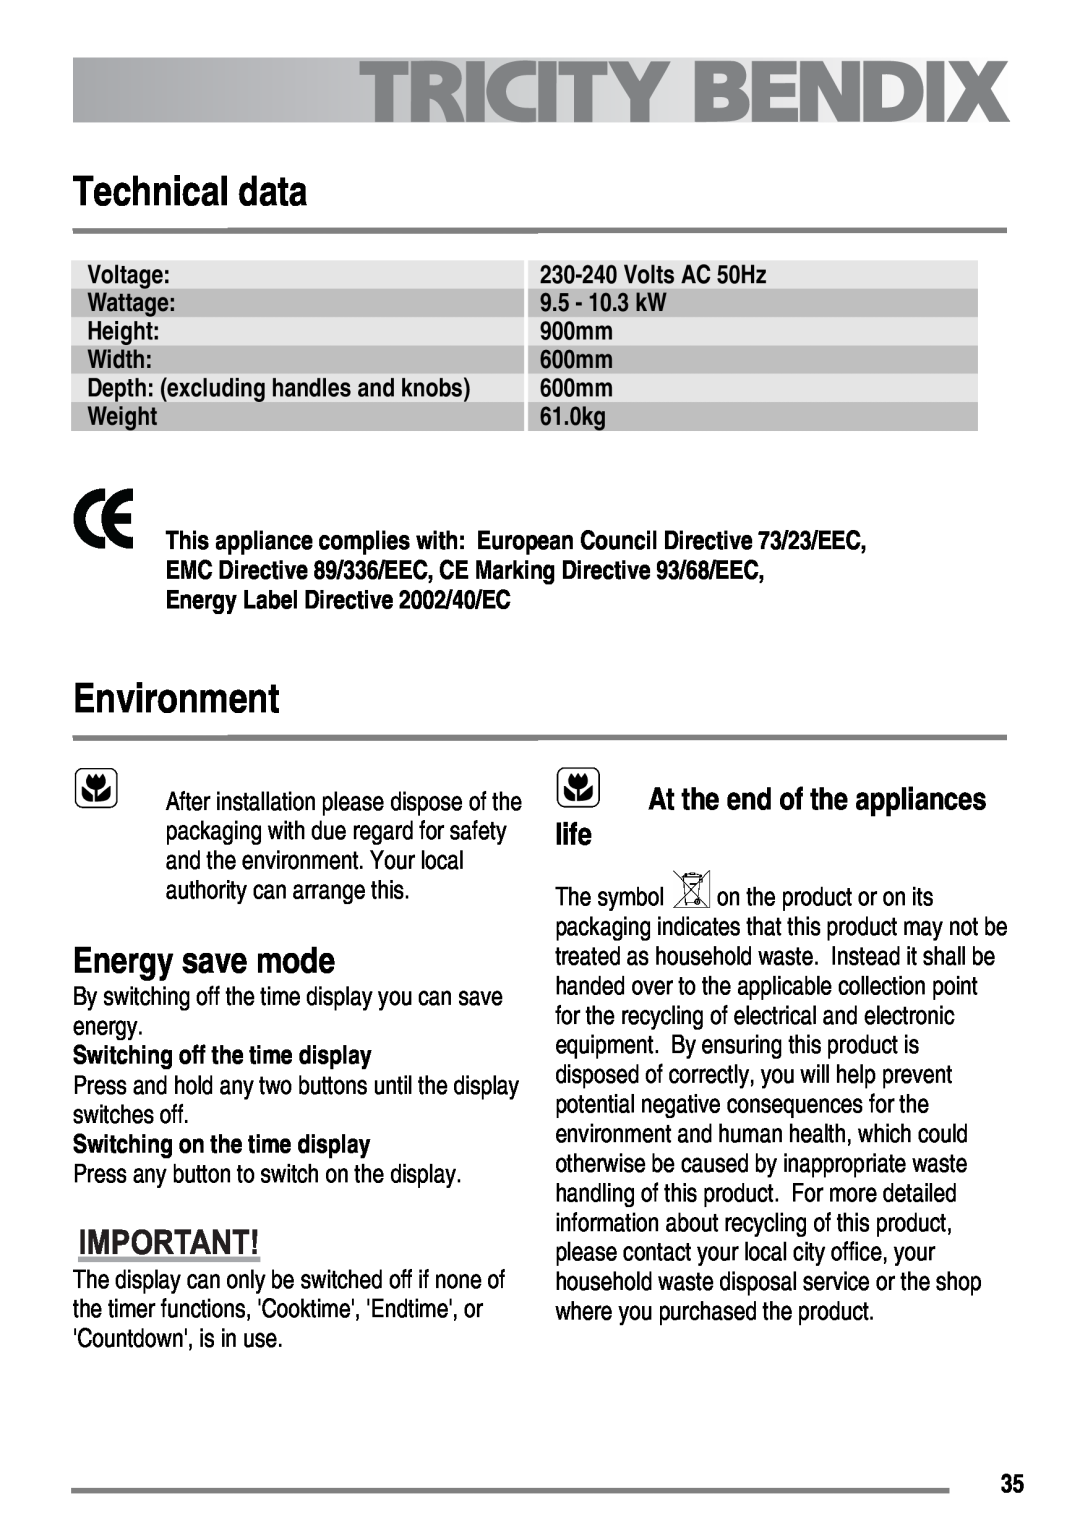 Tricity Bendix SE558 Technical data, Environment, Energy save mode, At the end of the appliances life, Voltage, Wattage 